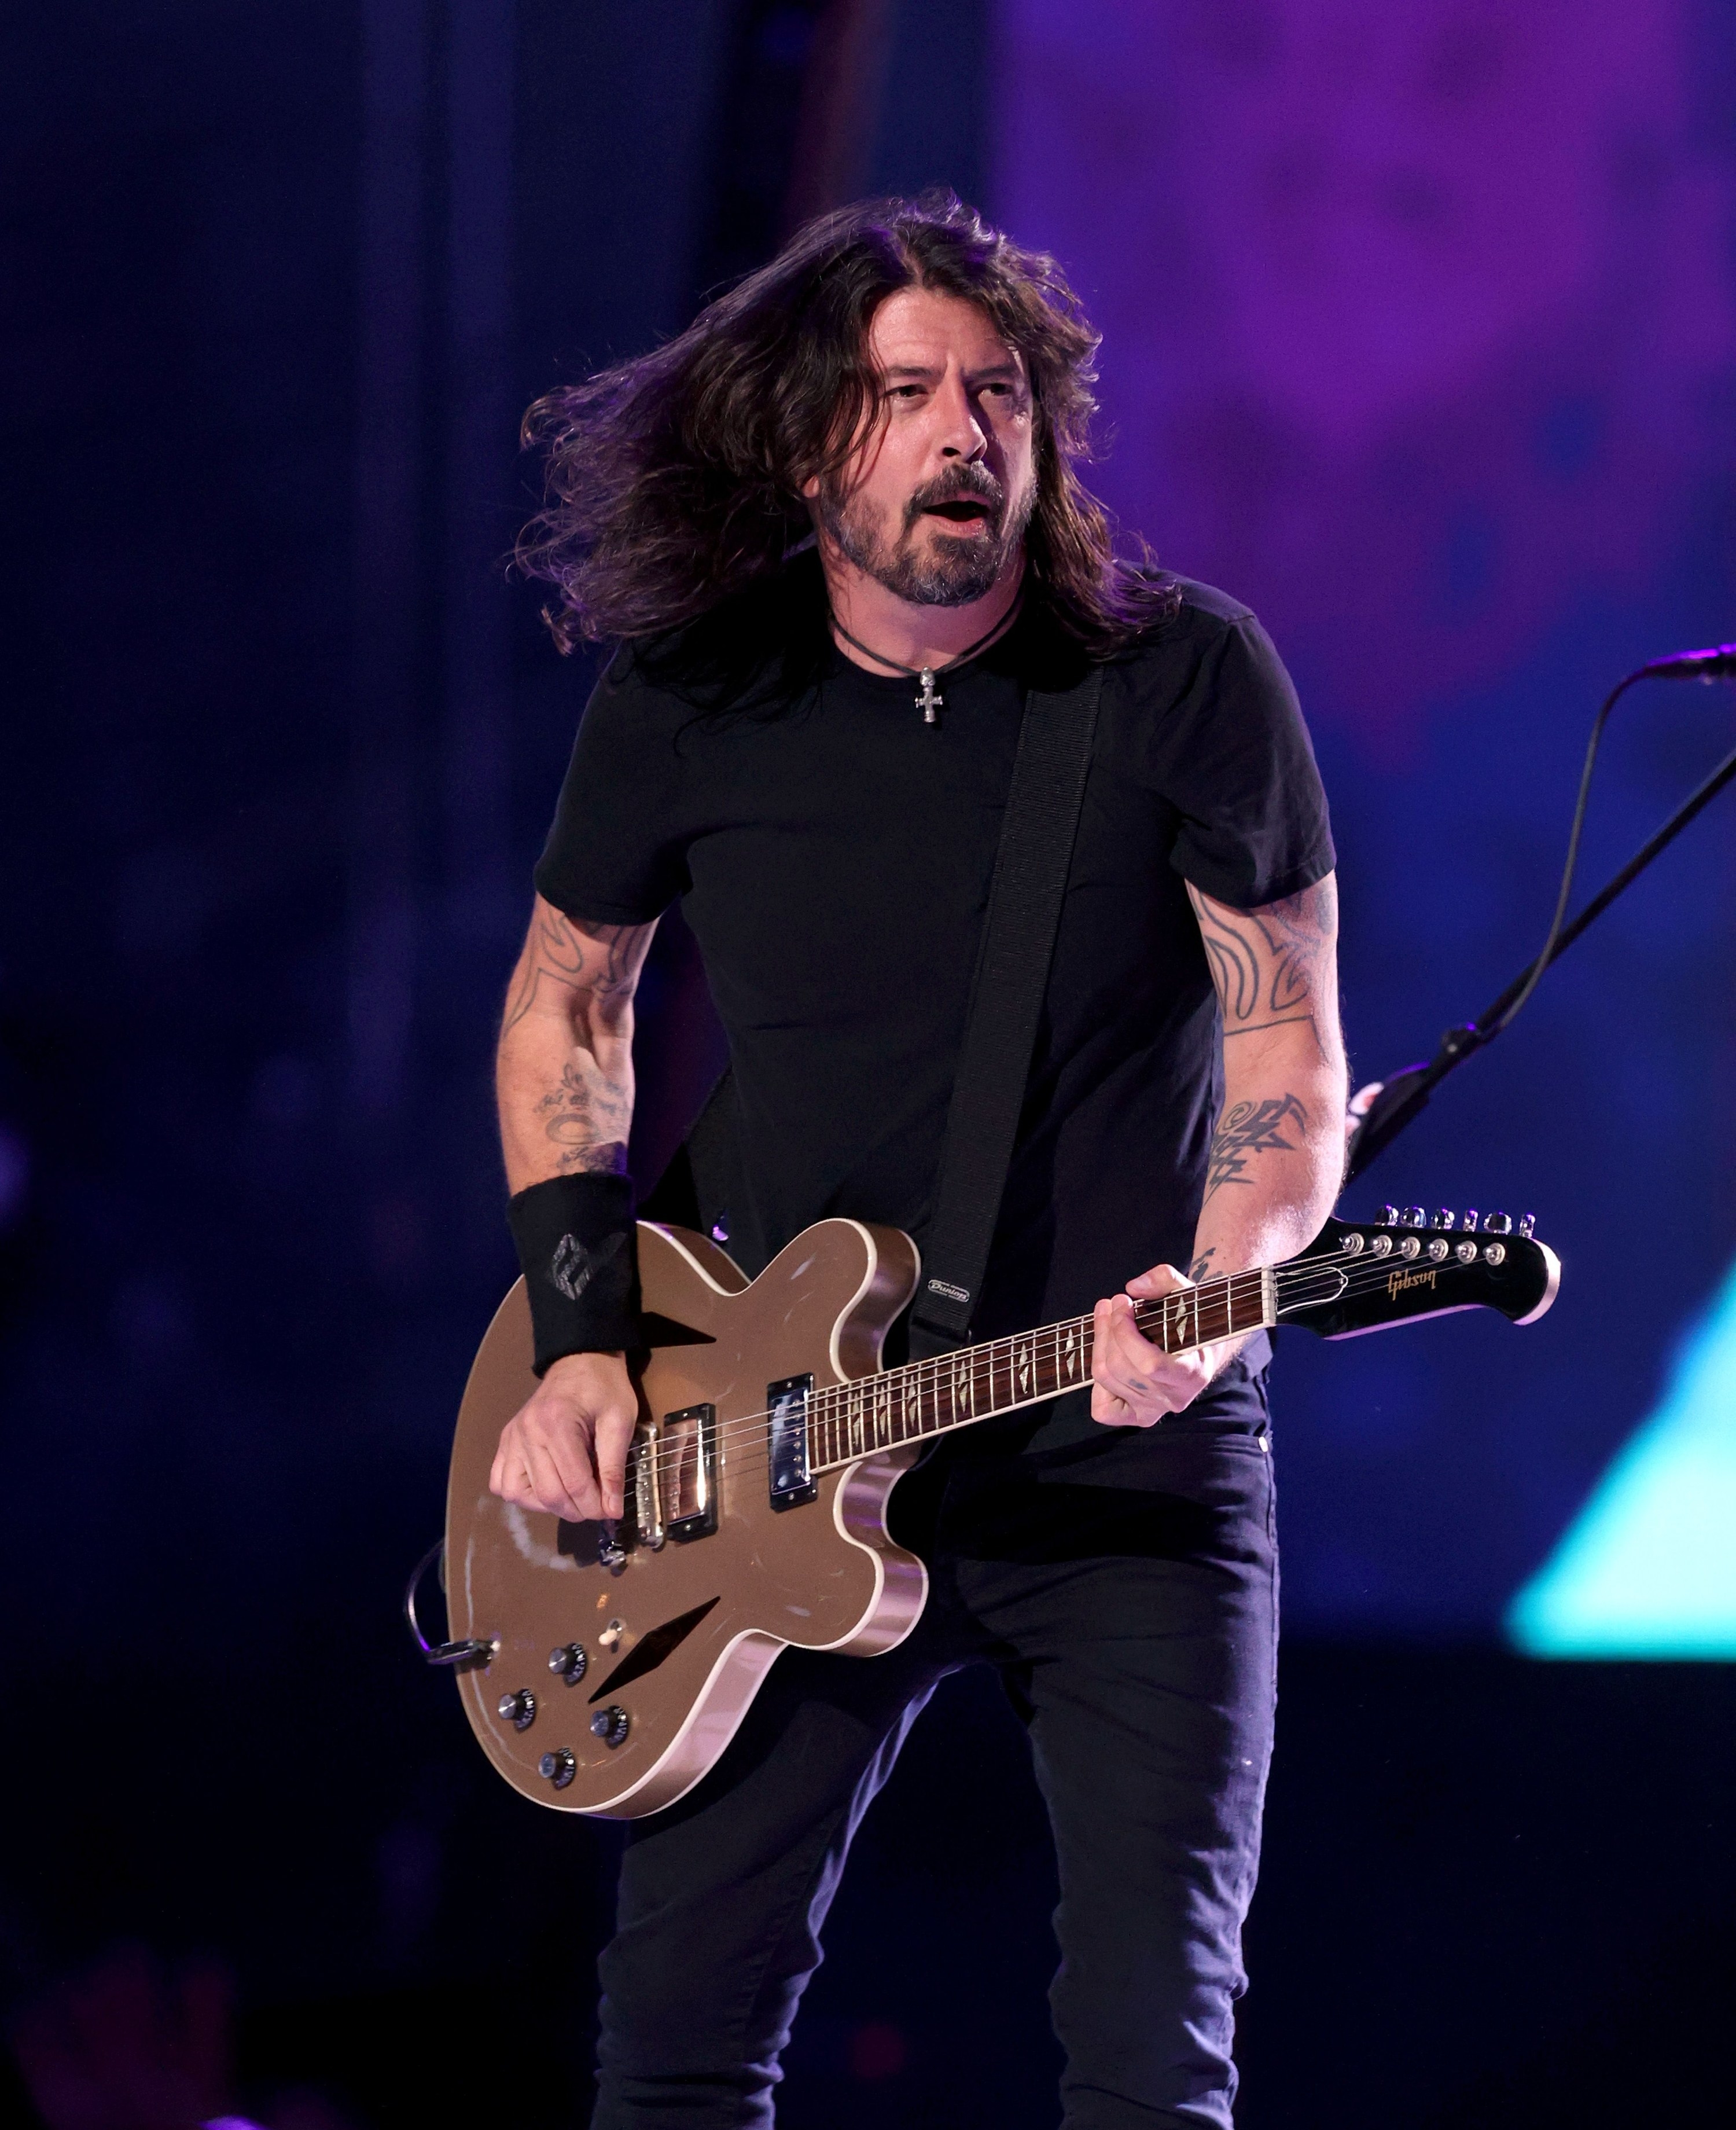 Dave Grohl on stage playing his guitar